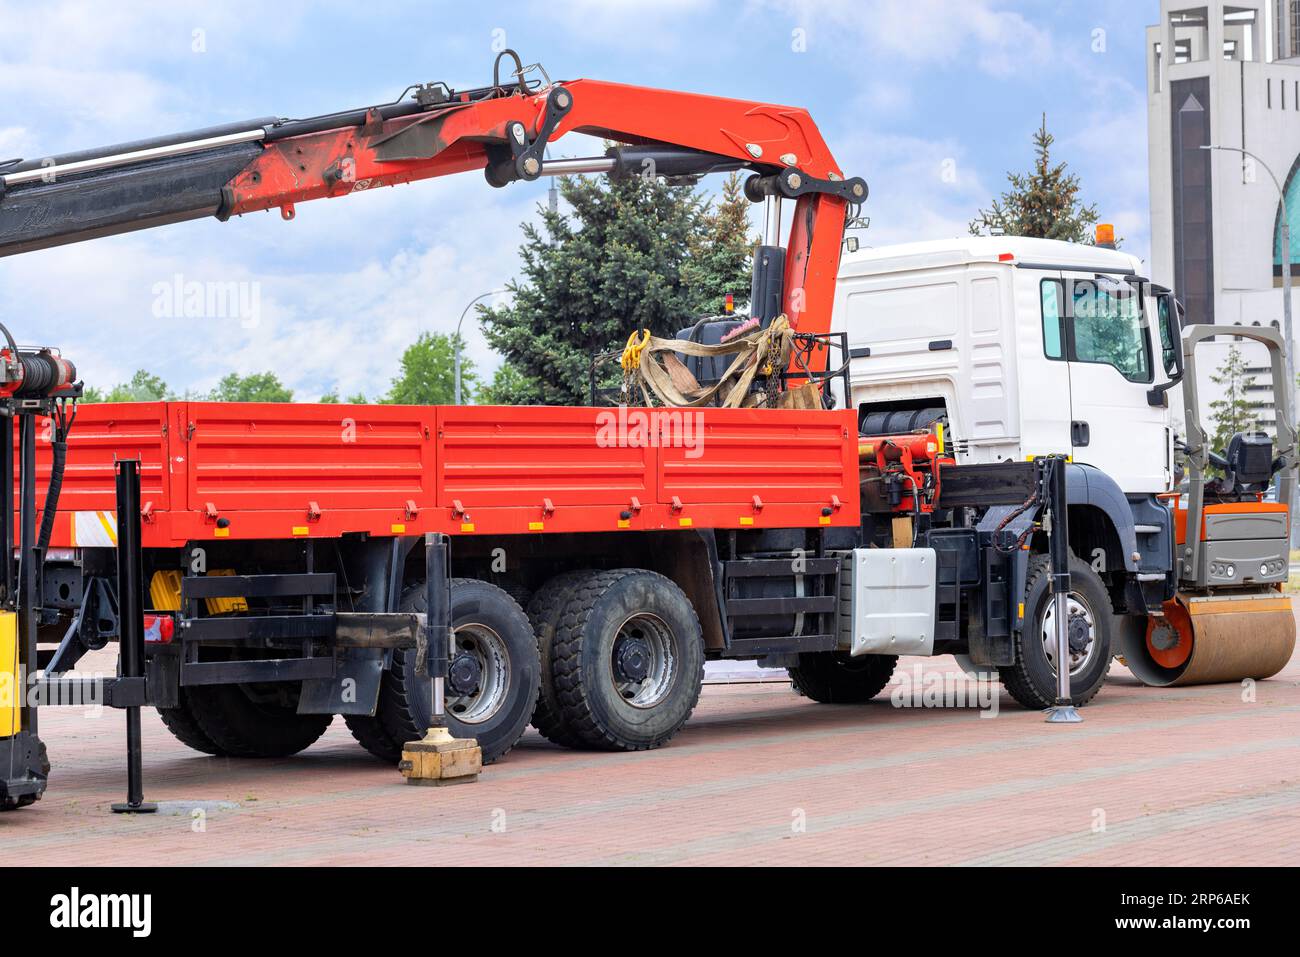 Loading and unloading machine of red color stands in the transport parking of the construction exhibition. Stock Photo